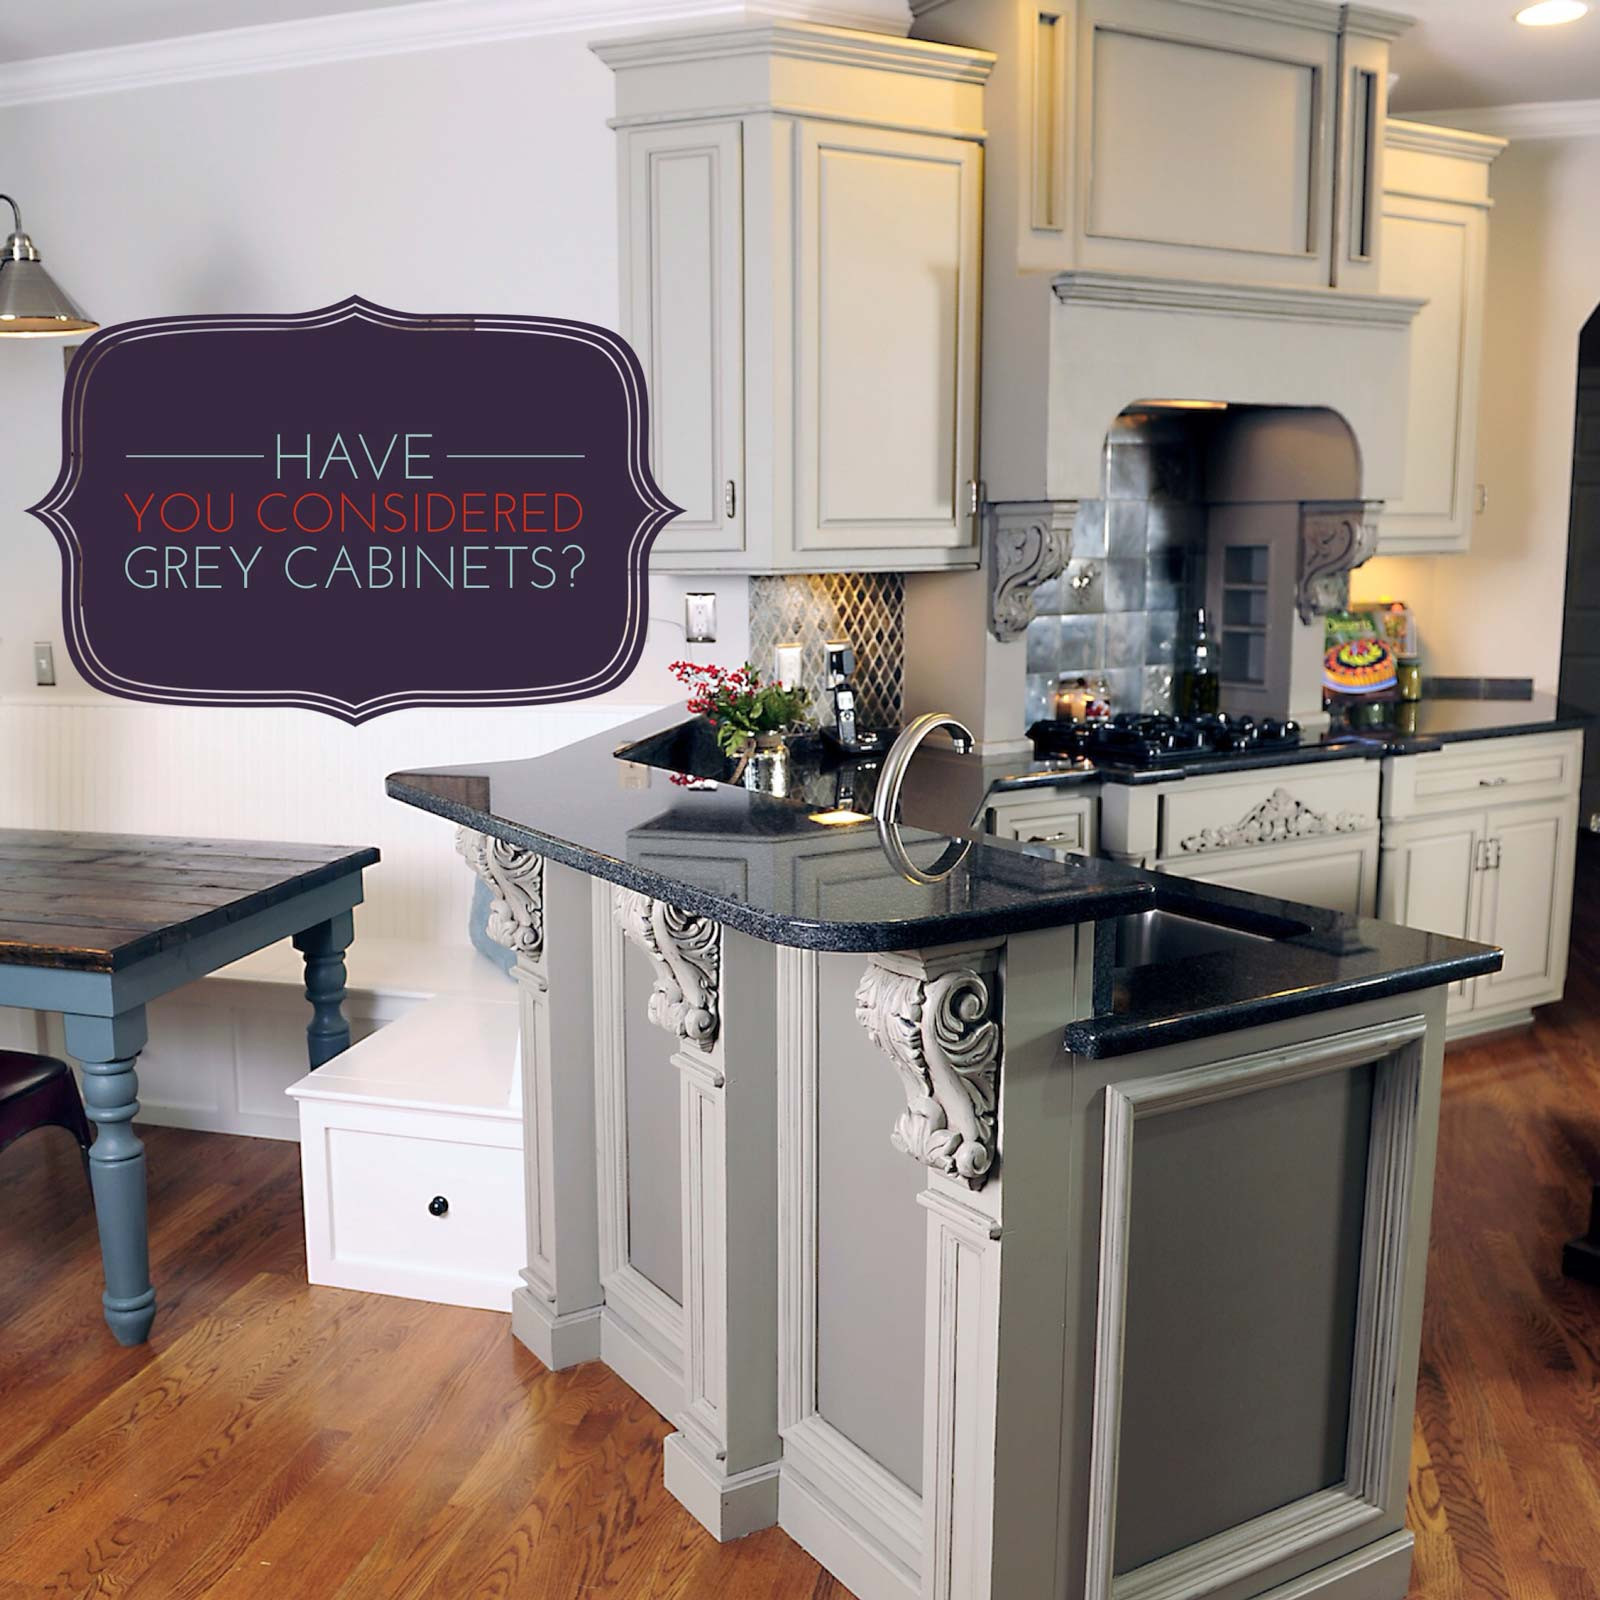 Grey Kitchen Cabinets
 Have you considered Grey Kitchen Cabinets